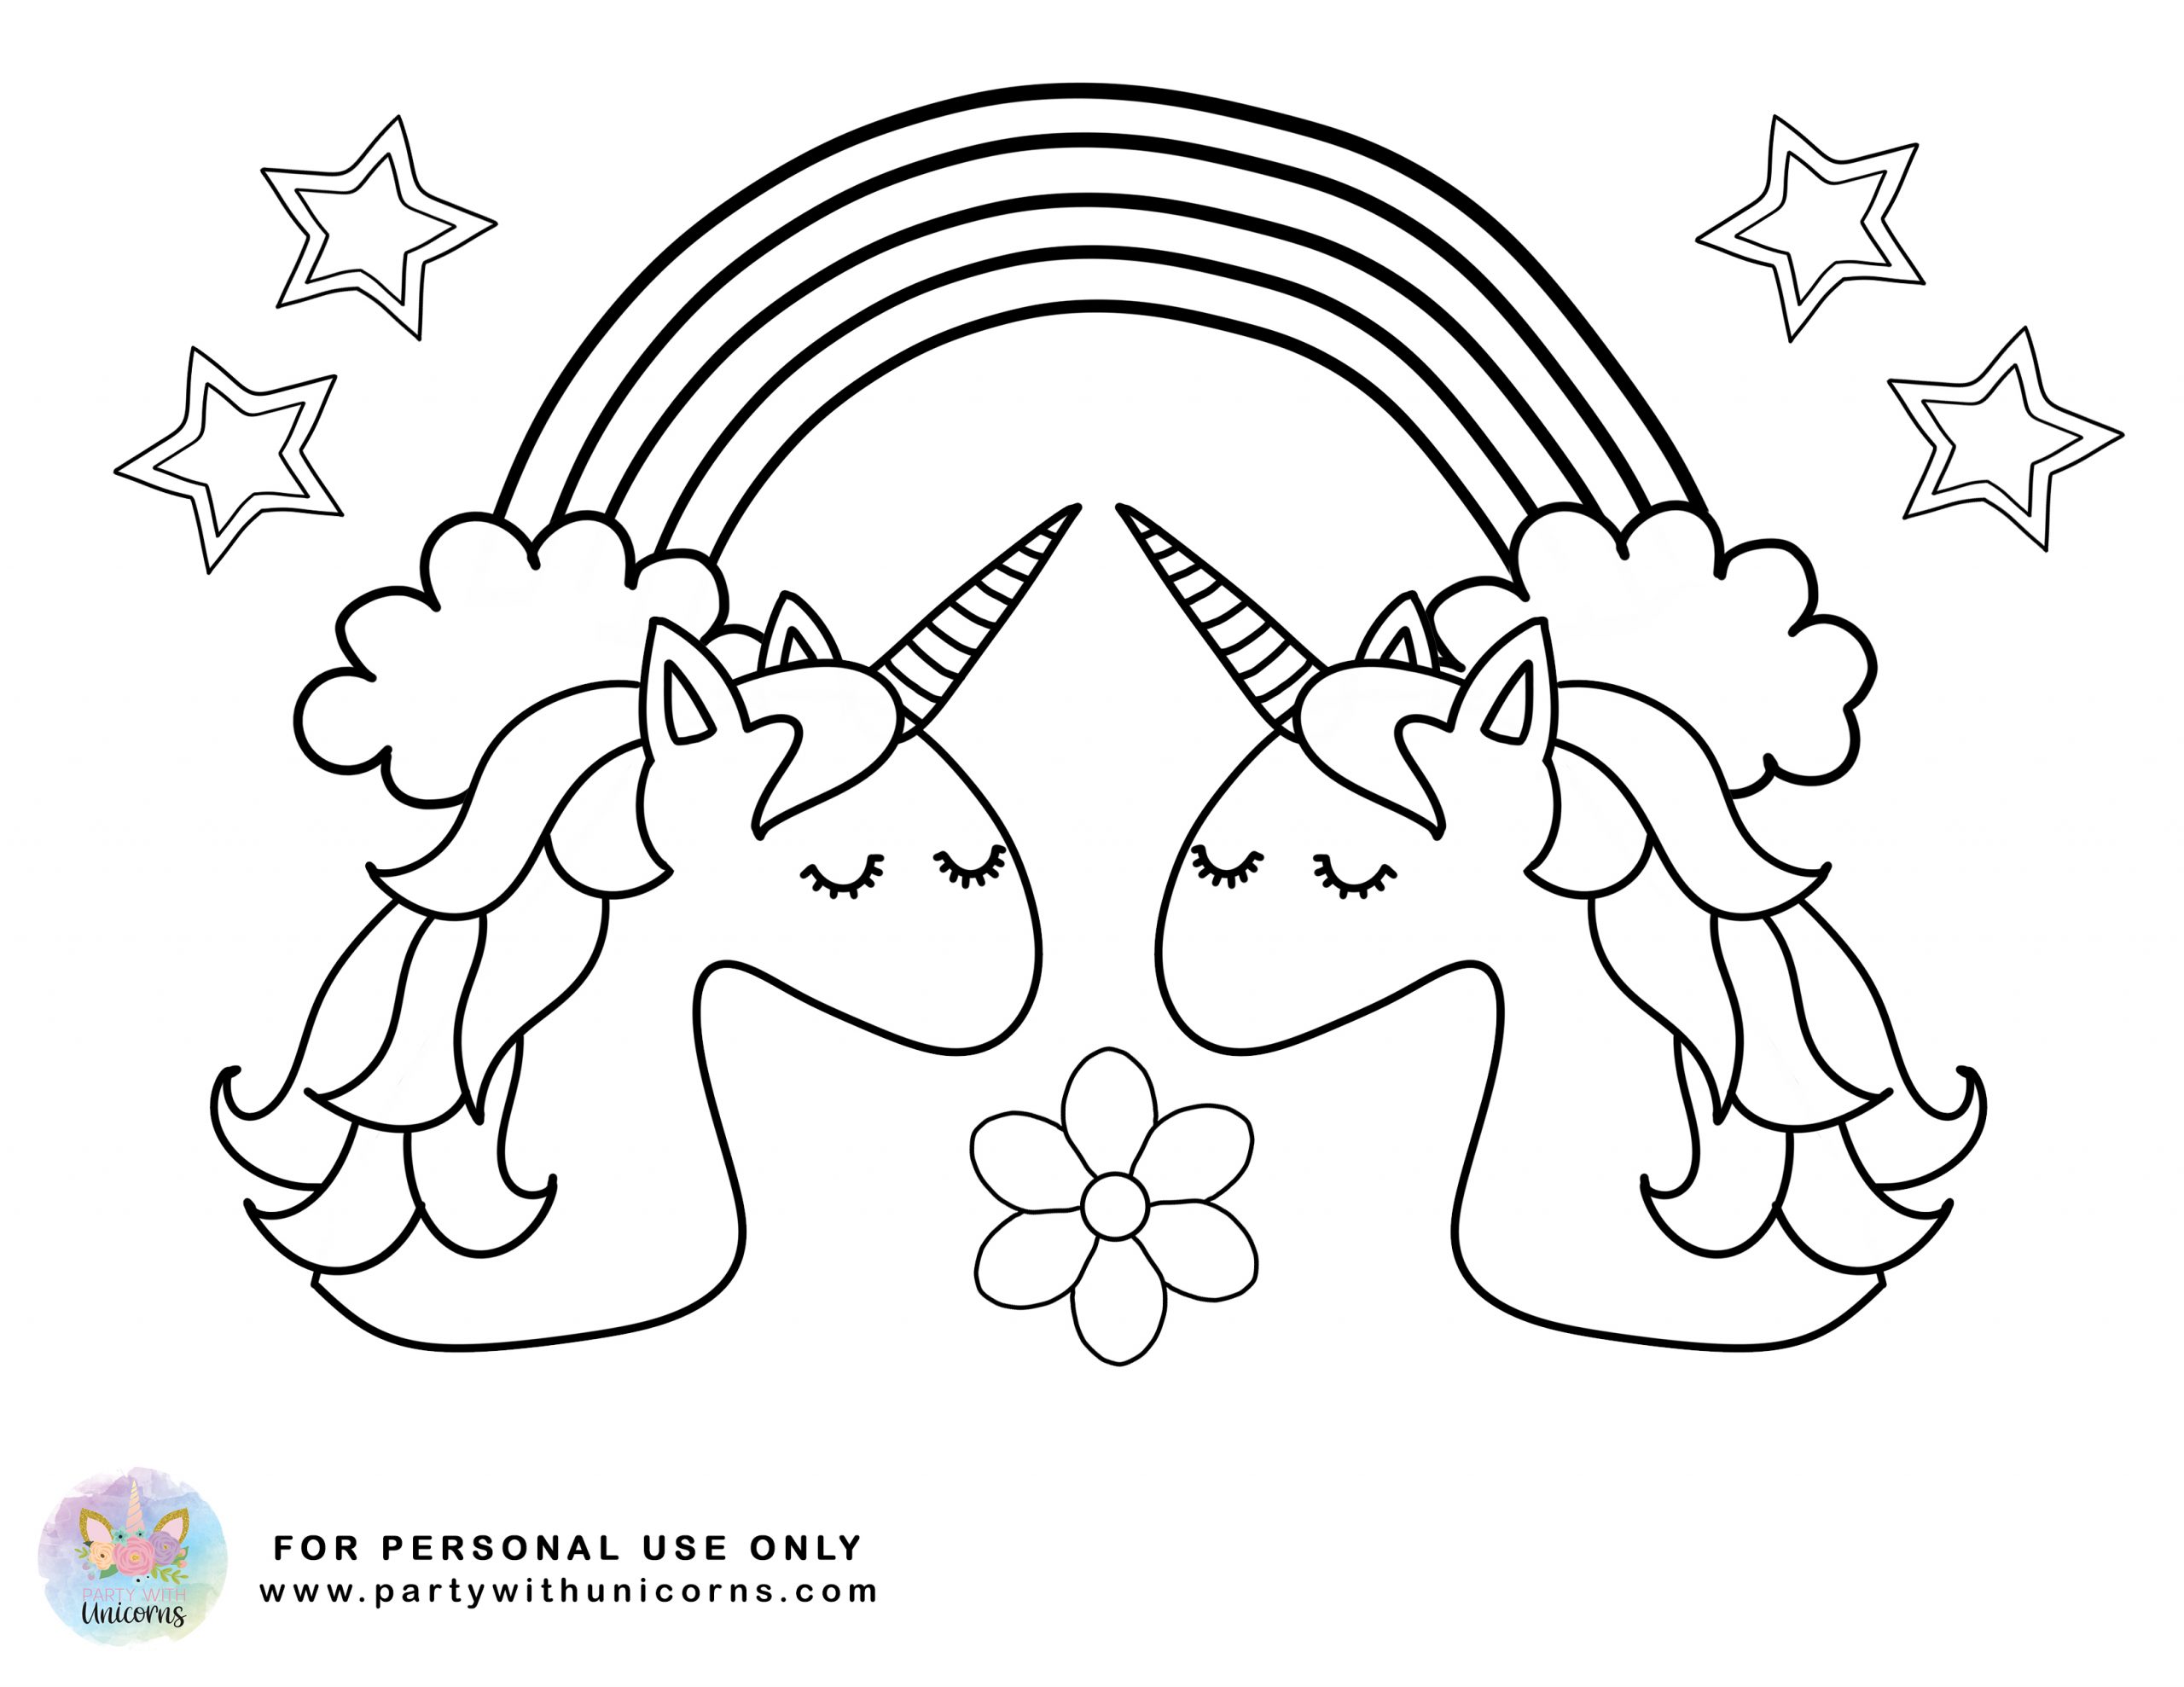 unicorn coloring pages free printable coloring book party with unicorns